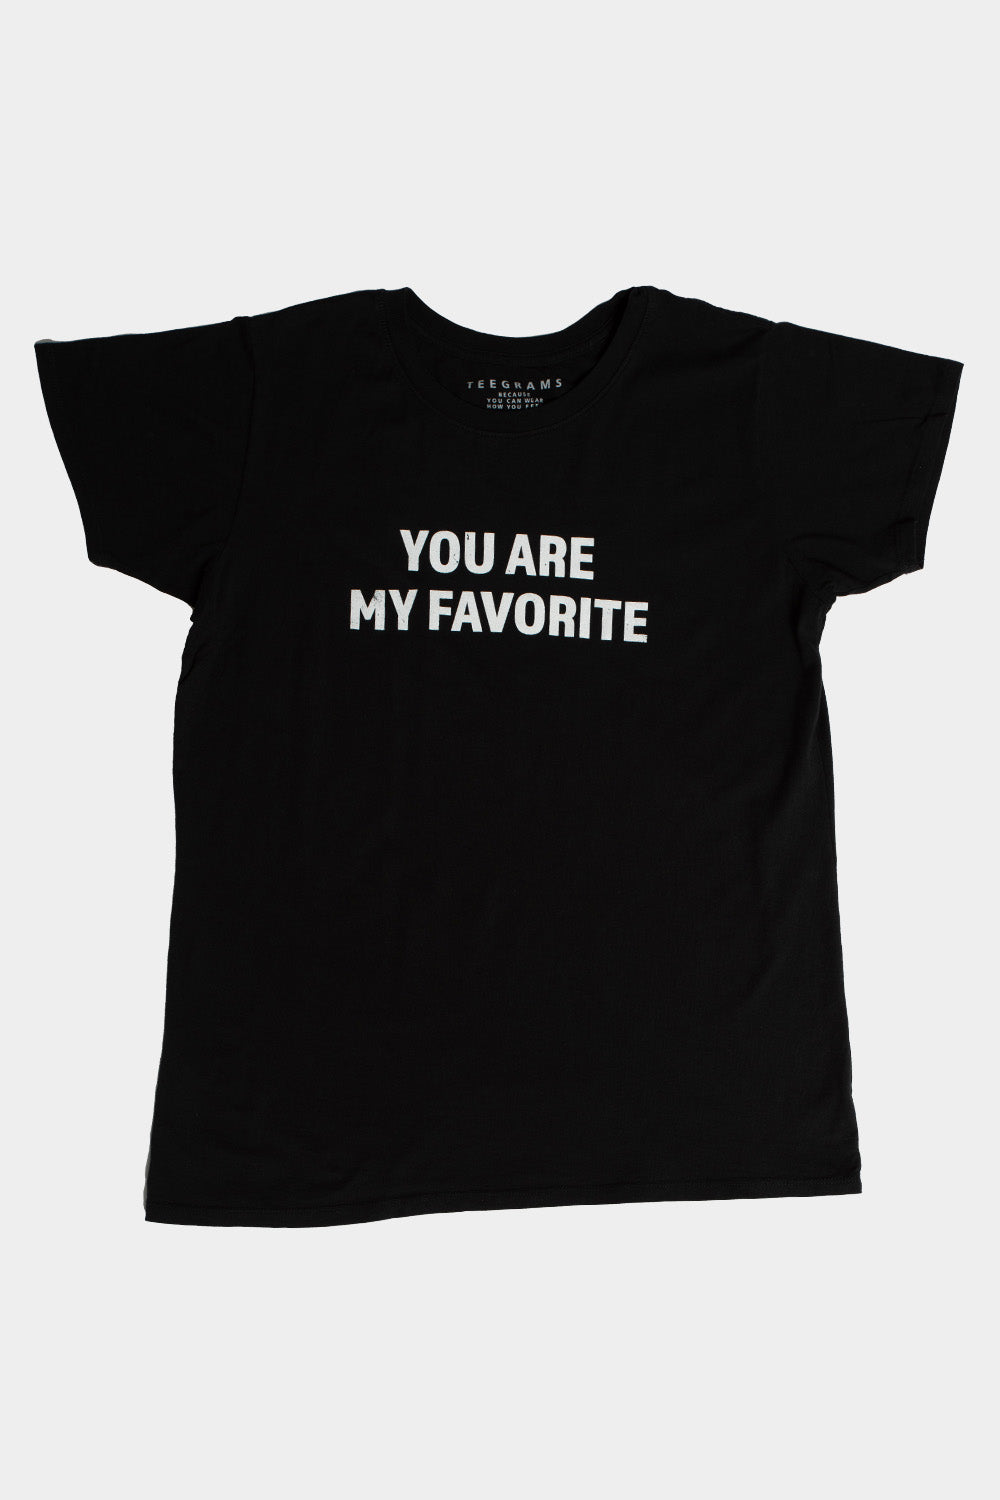 You Are My Favorite Unisex Tee